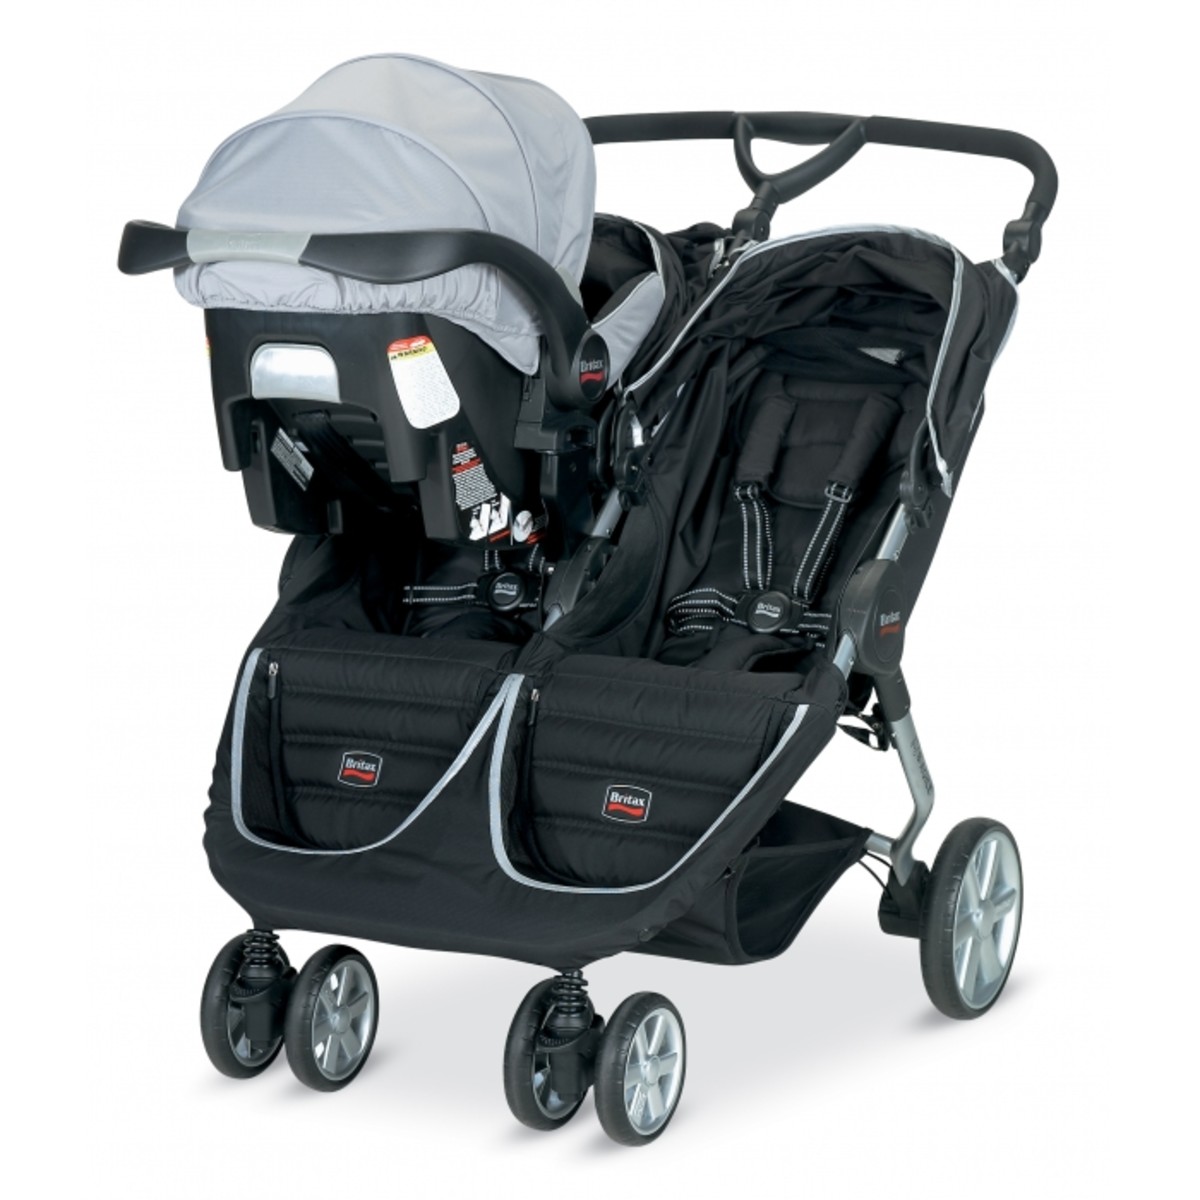 Britax B-Agile is considered to be one of the best double pram strollers on the market.